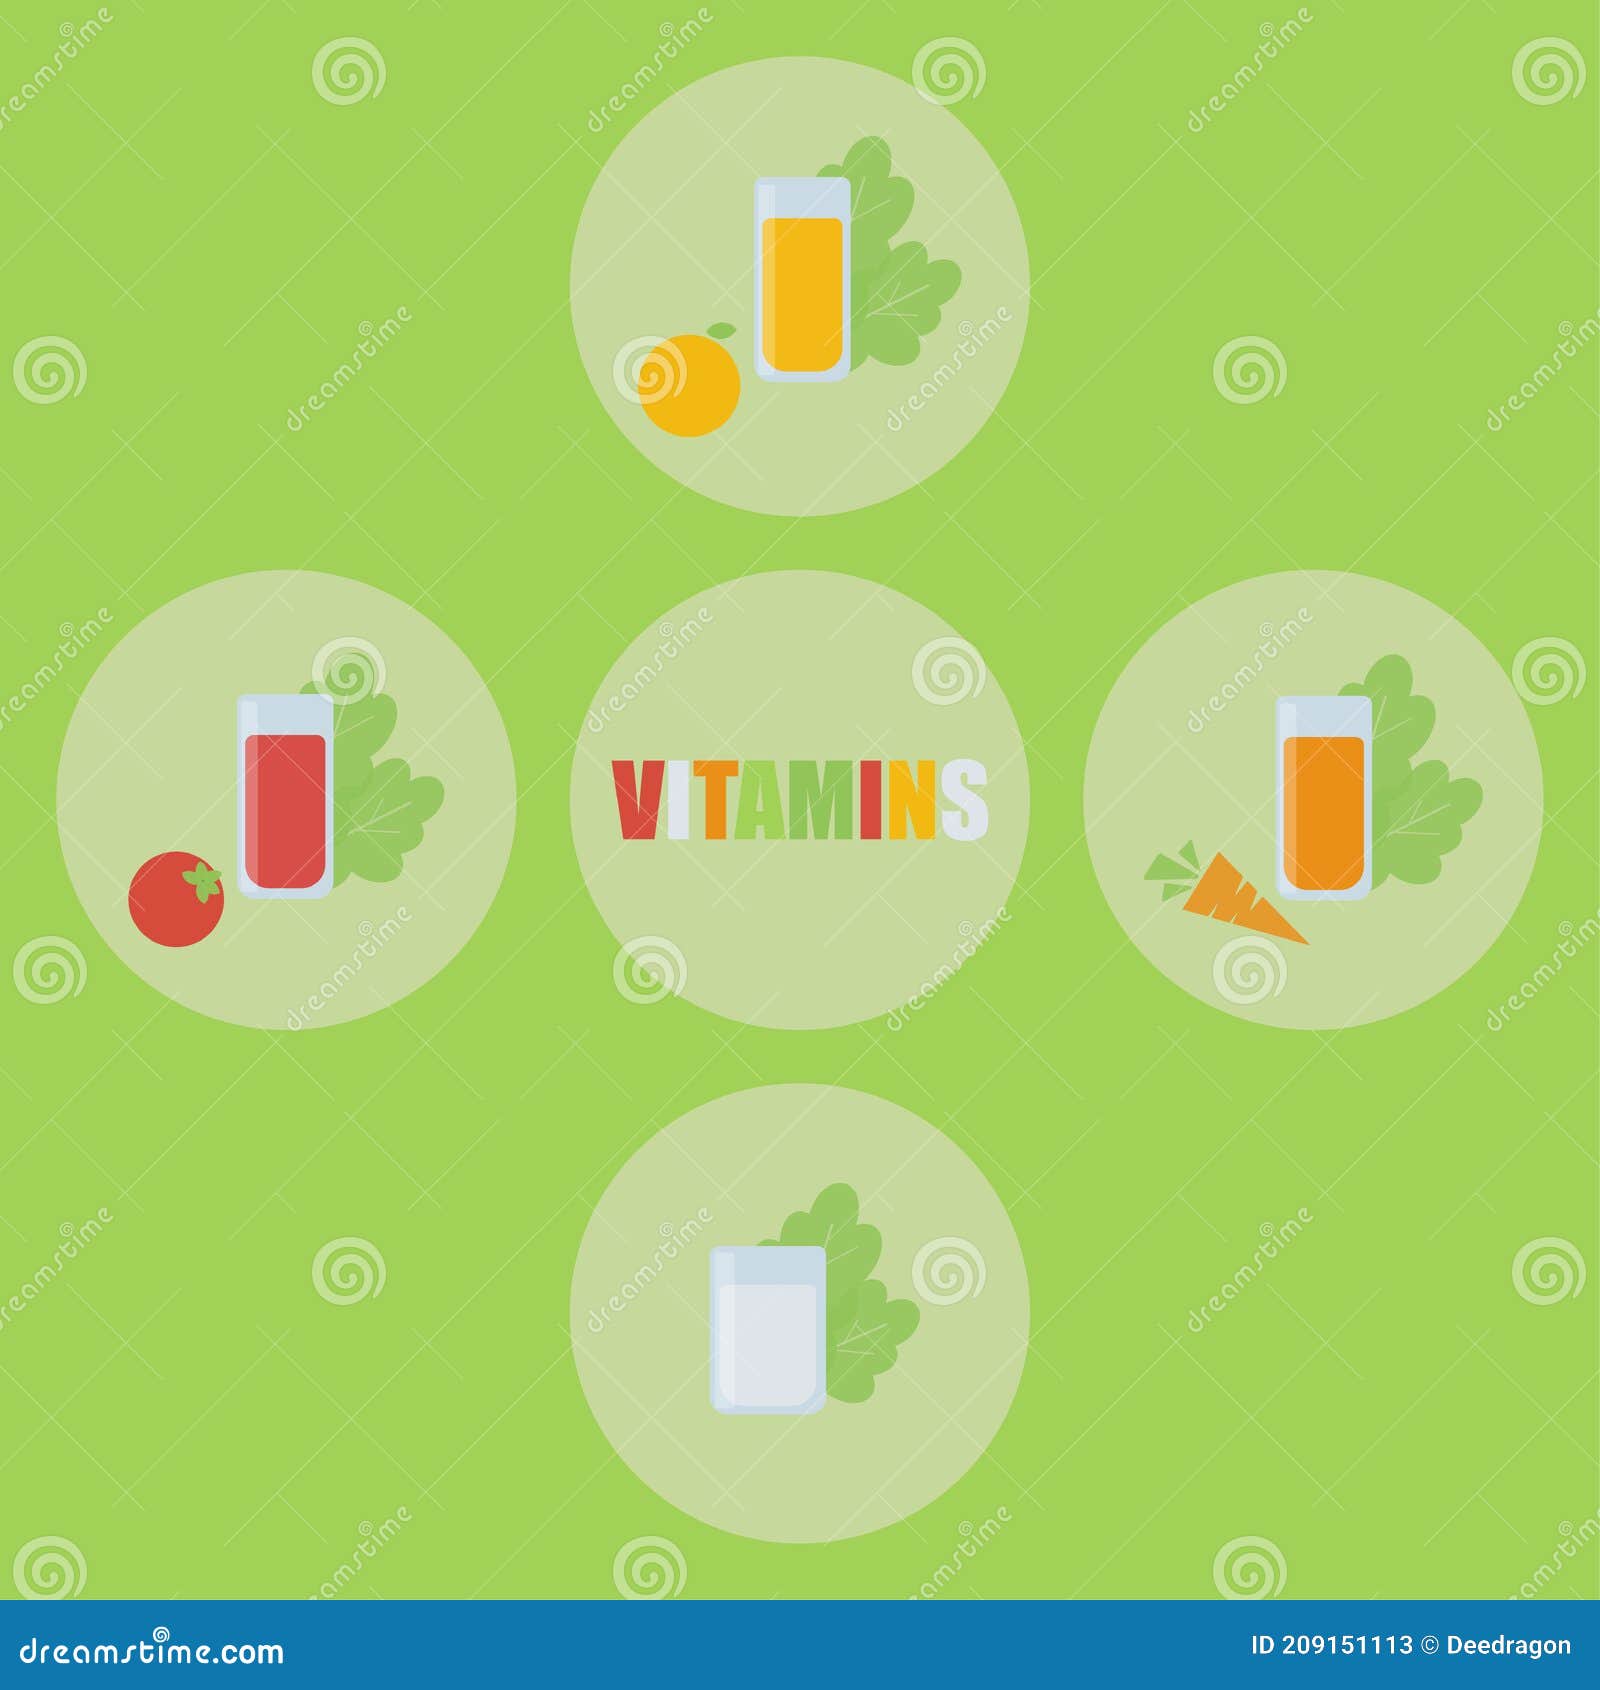 set of cold fresh juices  created in flat green cicle icon